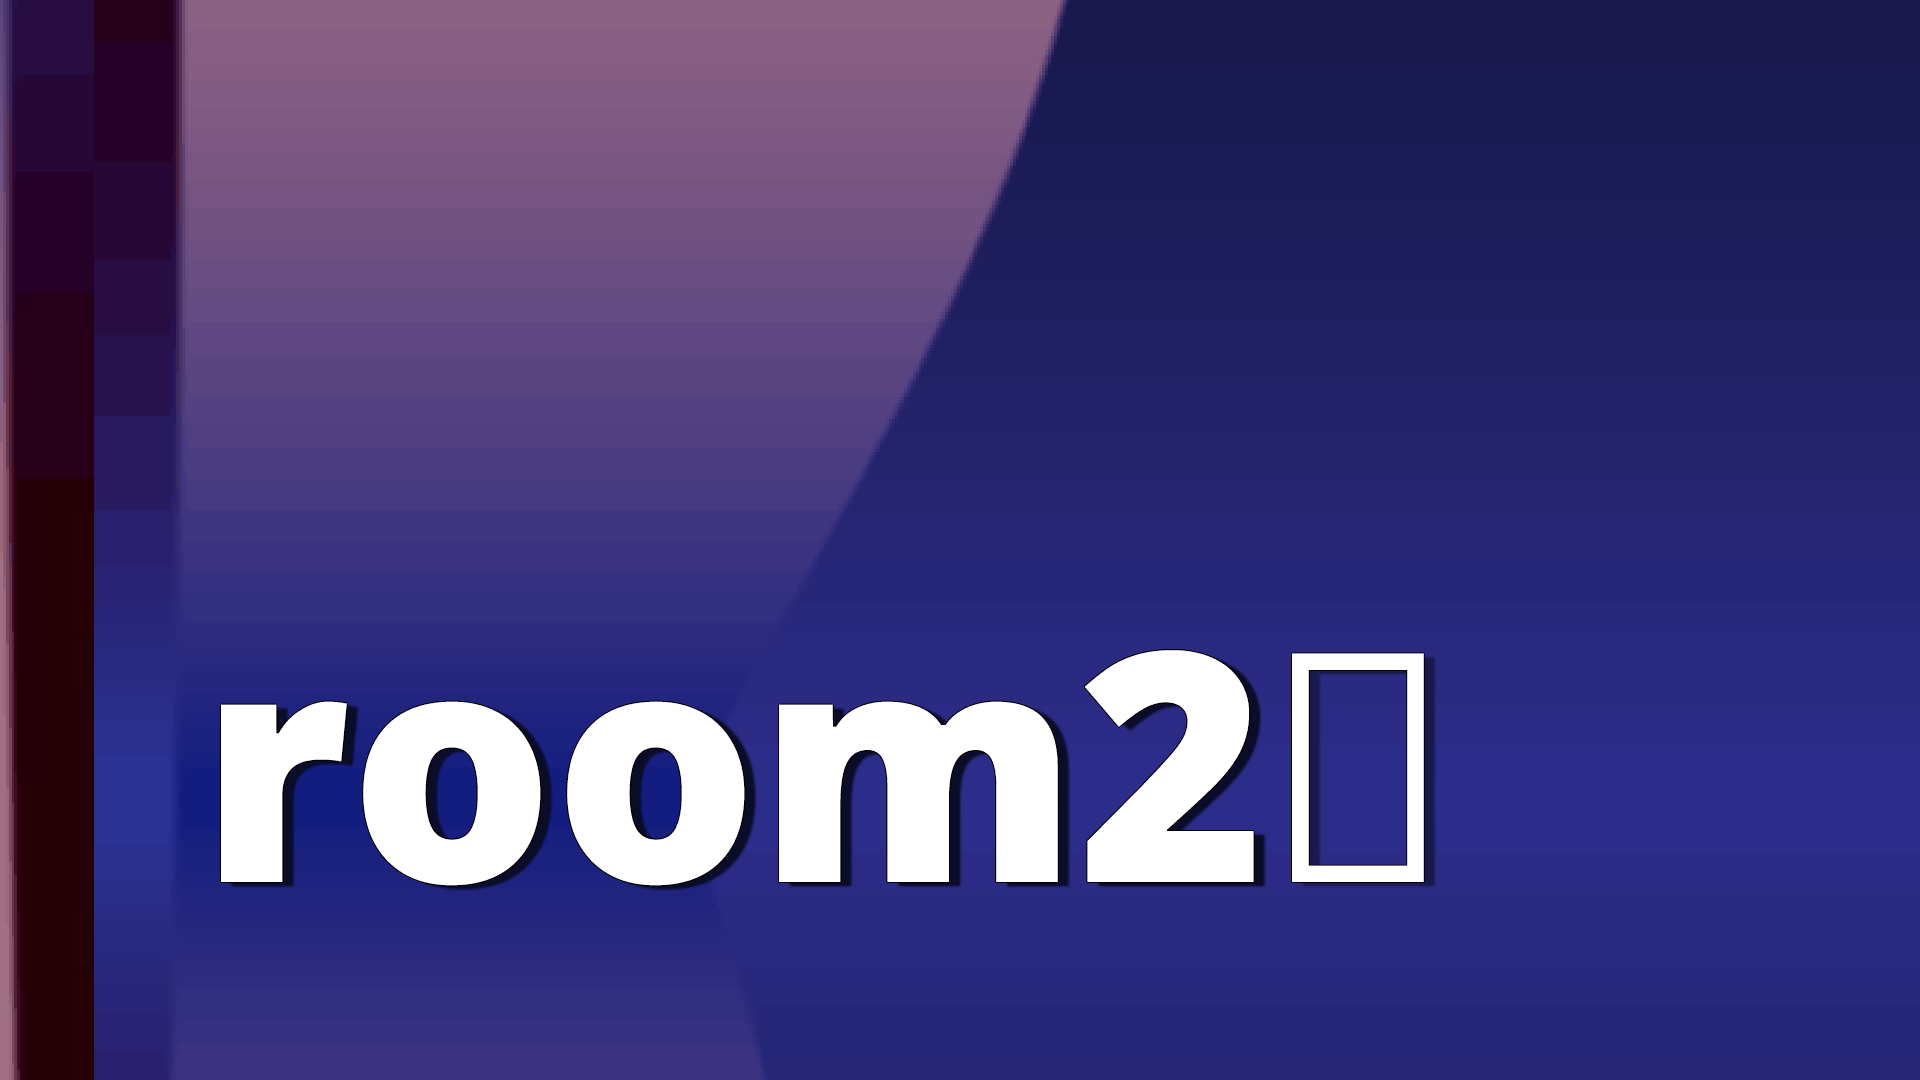 A gradient blue background behind bold white text that reads room2 with a flashing square cursor that is flickering in and out.